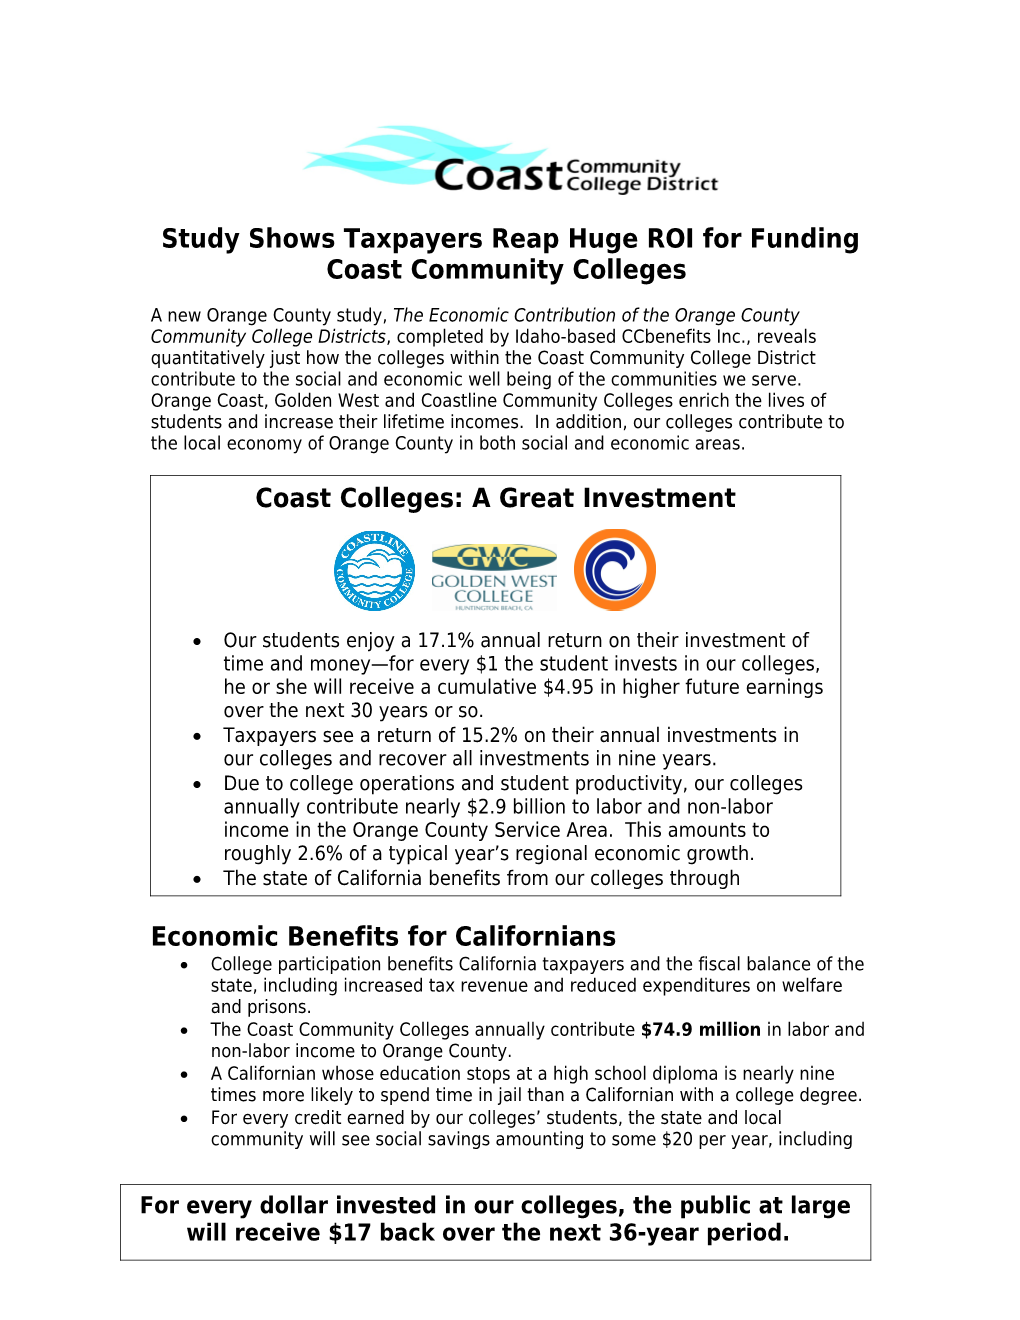 Study Shows Taxpayers Reap Huge ROI for Funding Coast Community Colleges